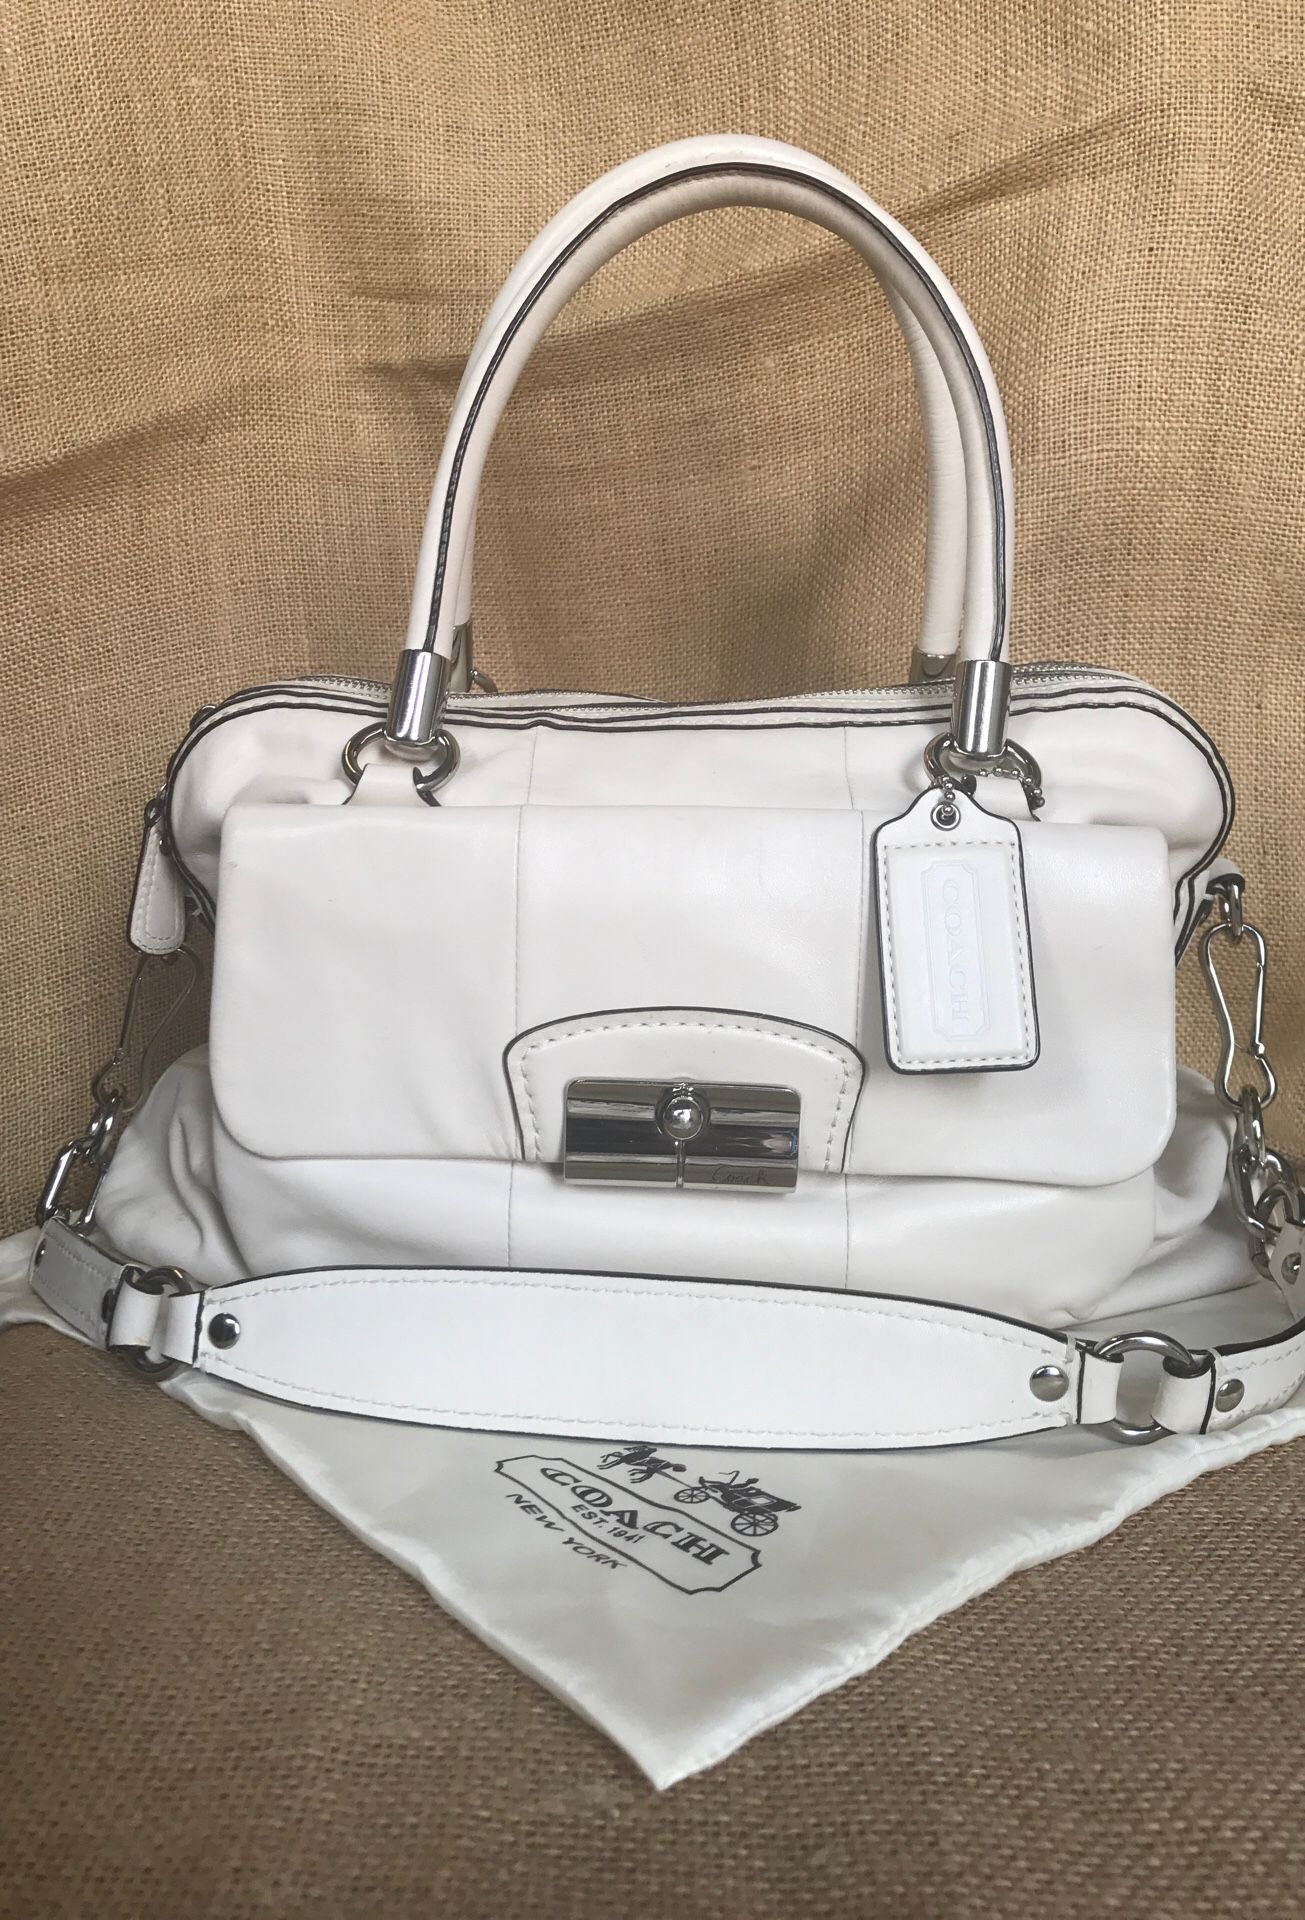 Coach leather Kristen satchel with strap